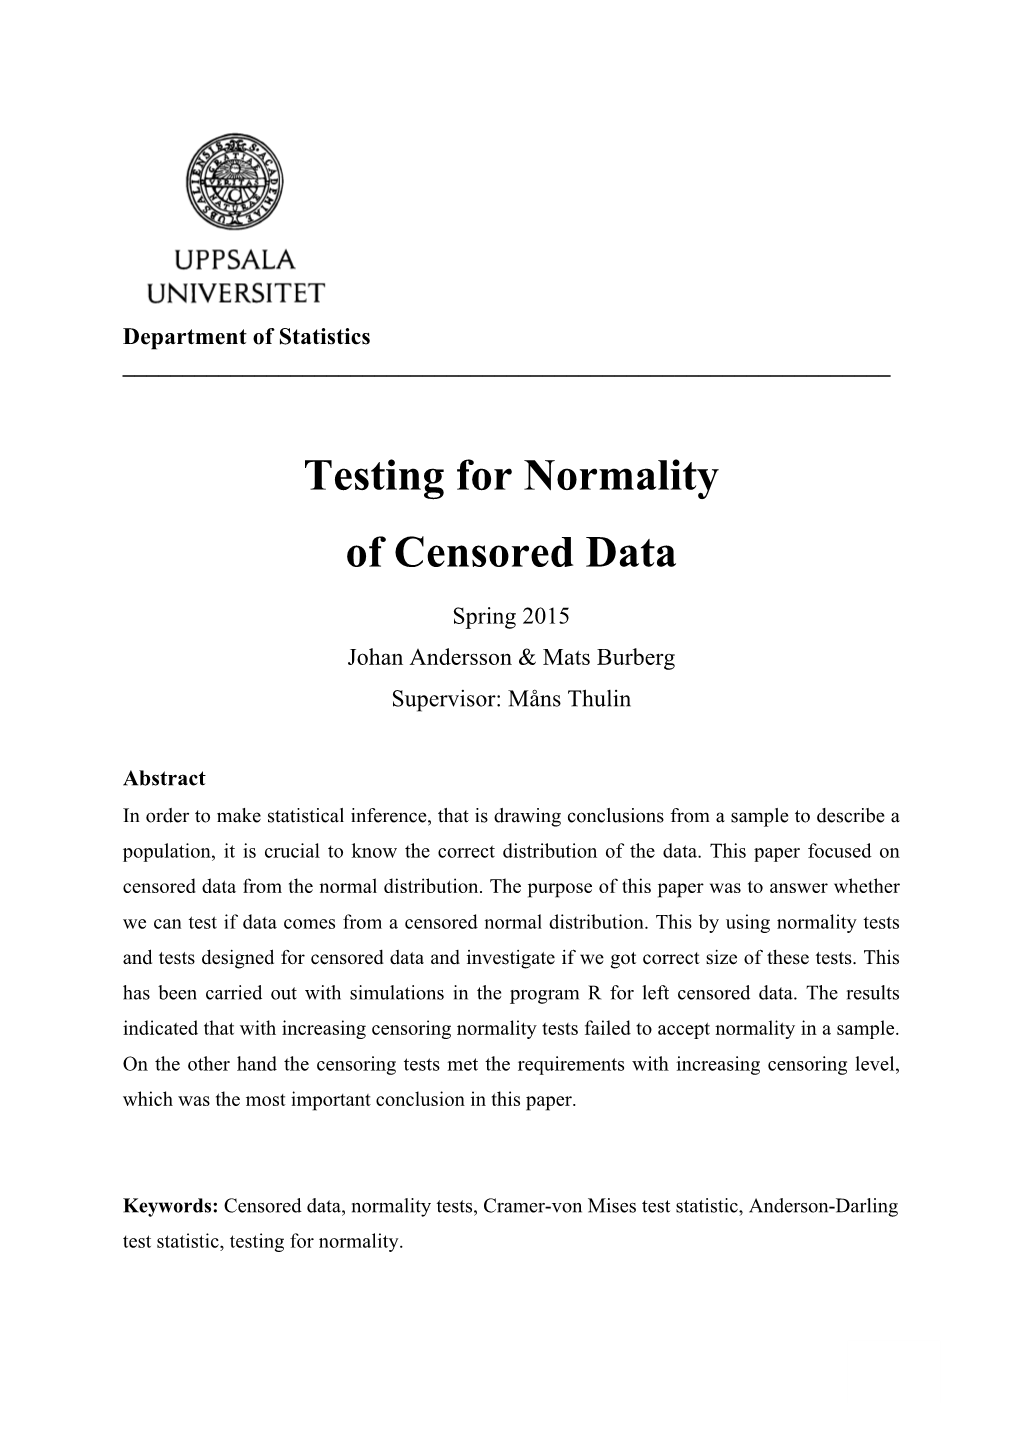 Testing for Normality of Censored Data